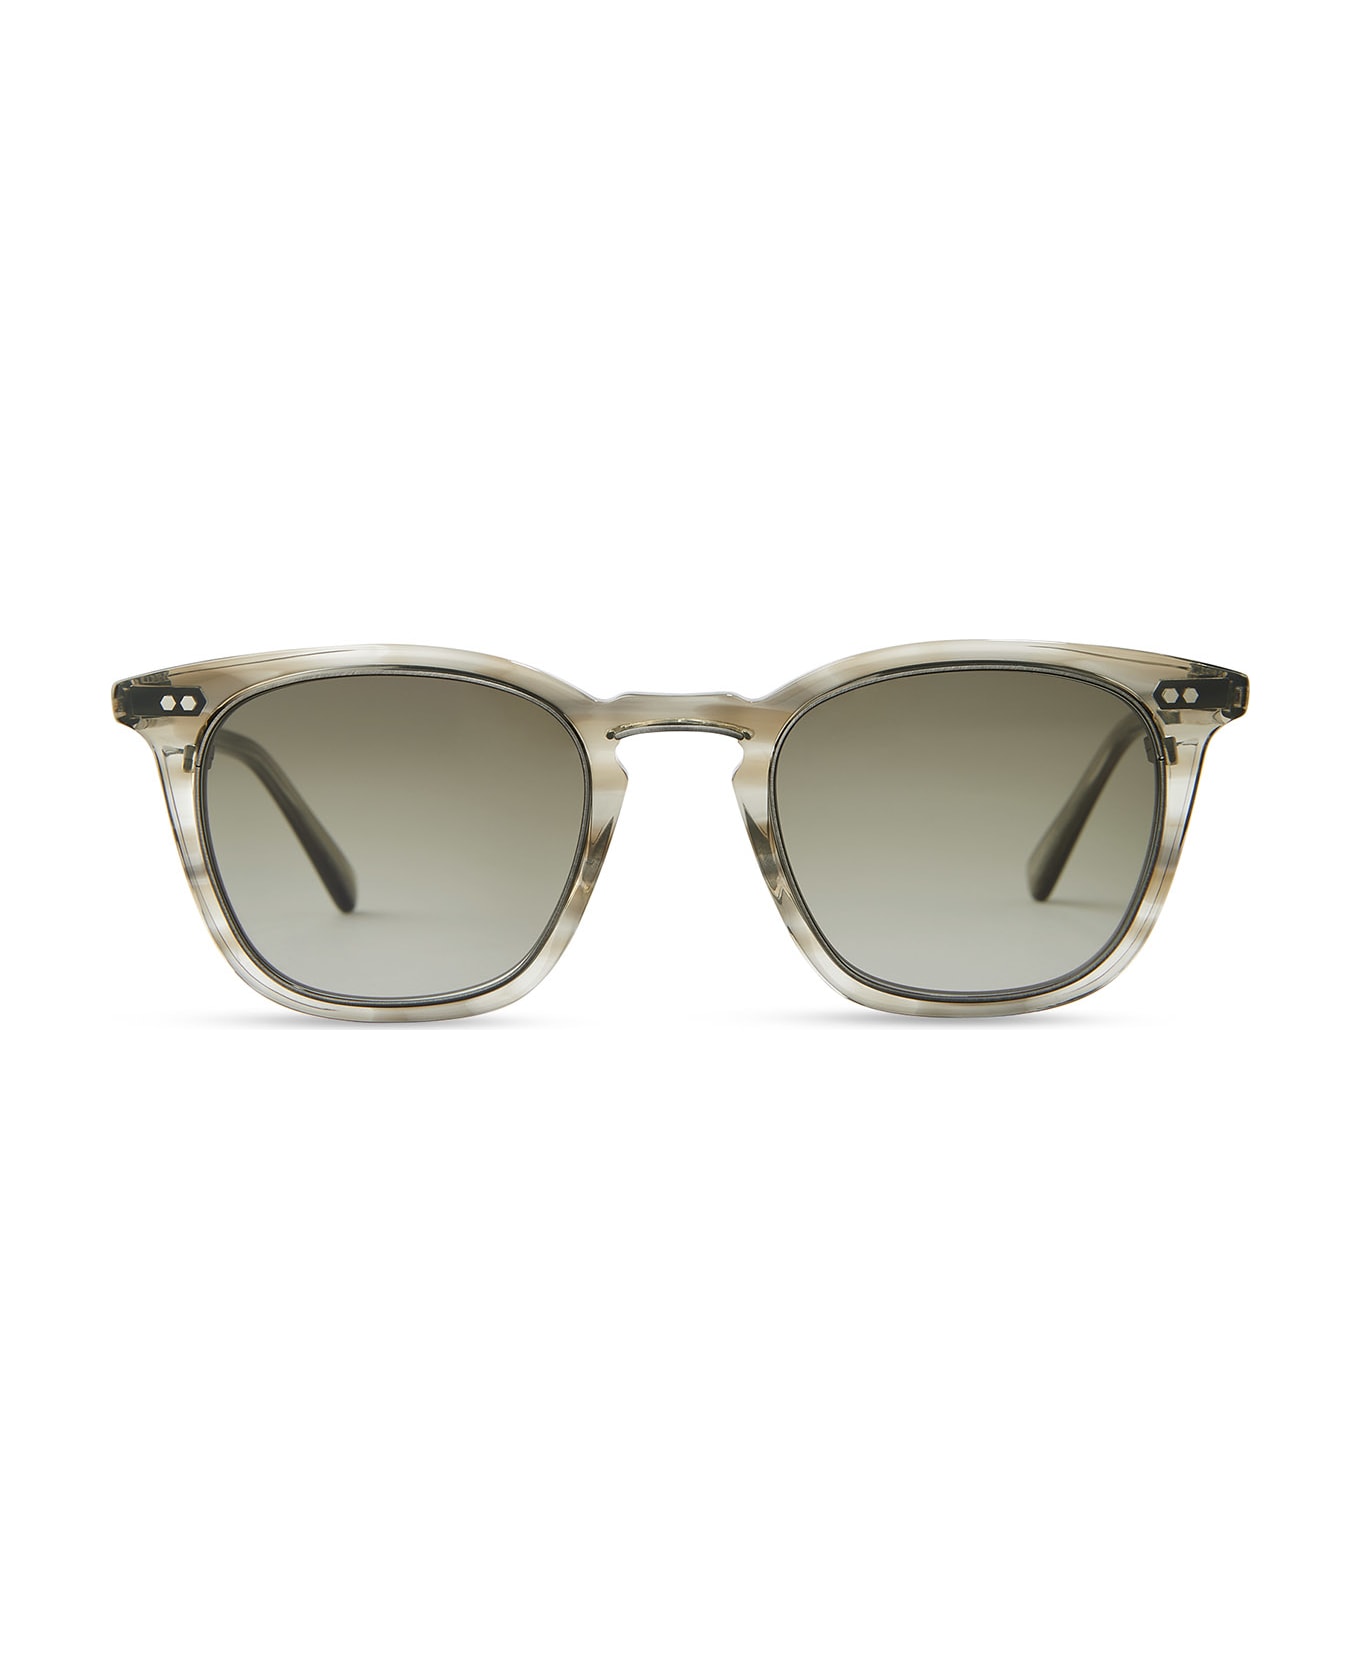 Mr. Leight Getty Ii S Celestial Grey-pewter Sunglasses -  Celestial Grey-Pewter